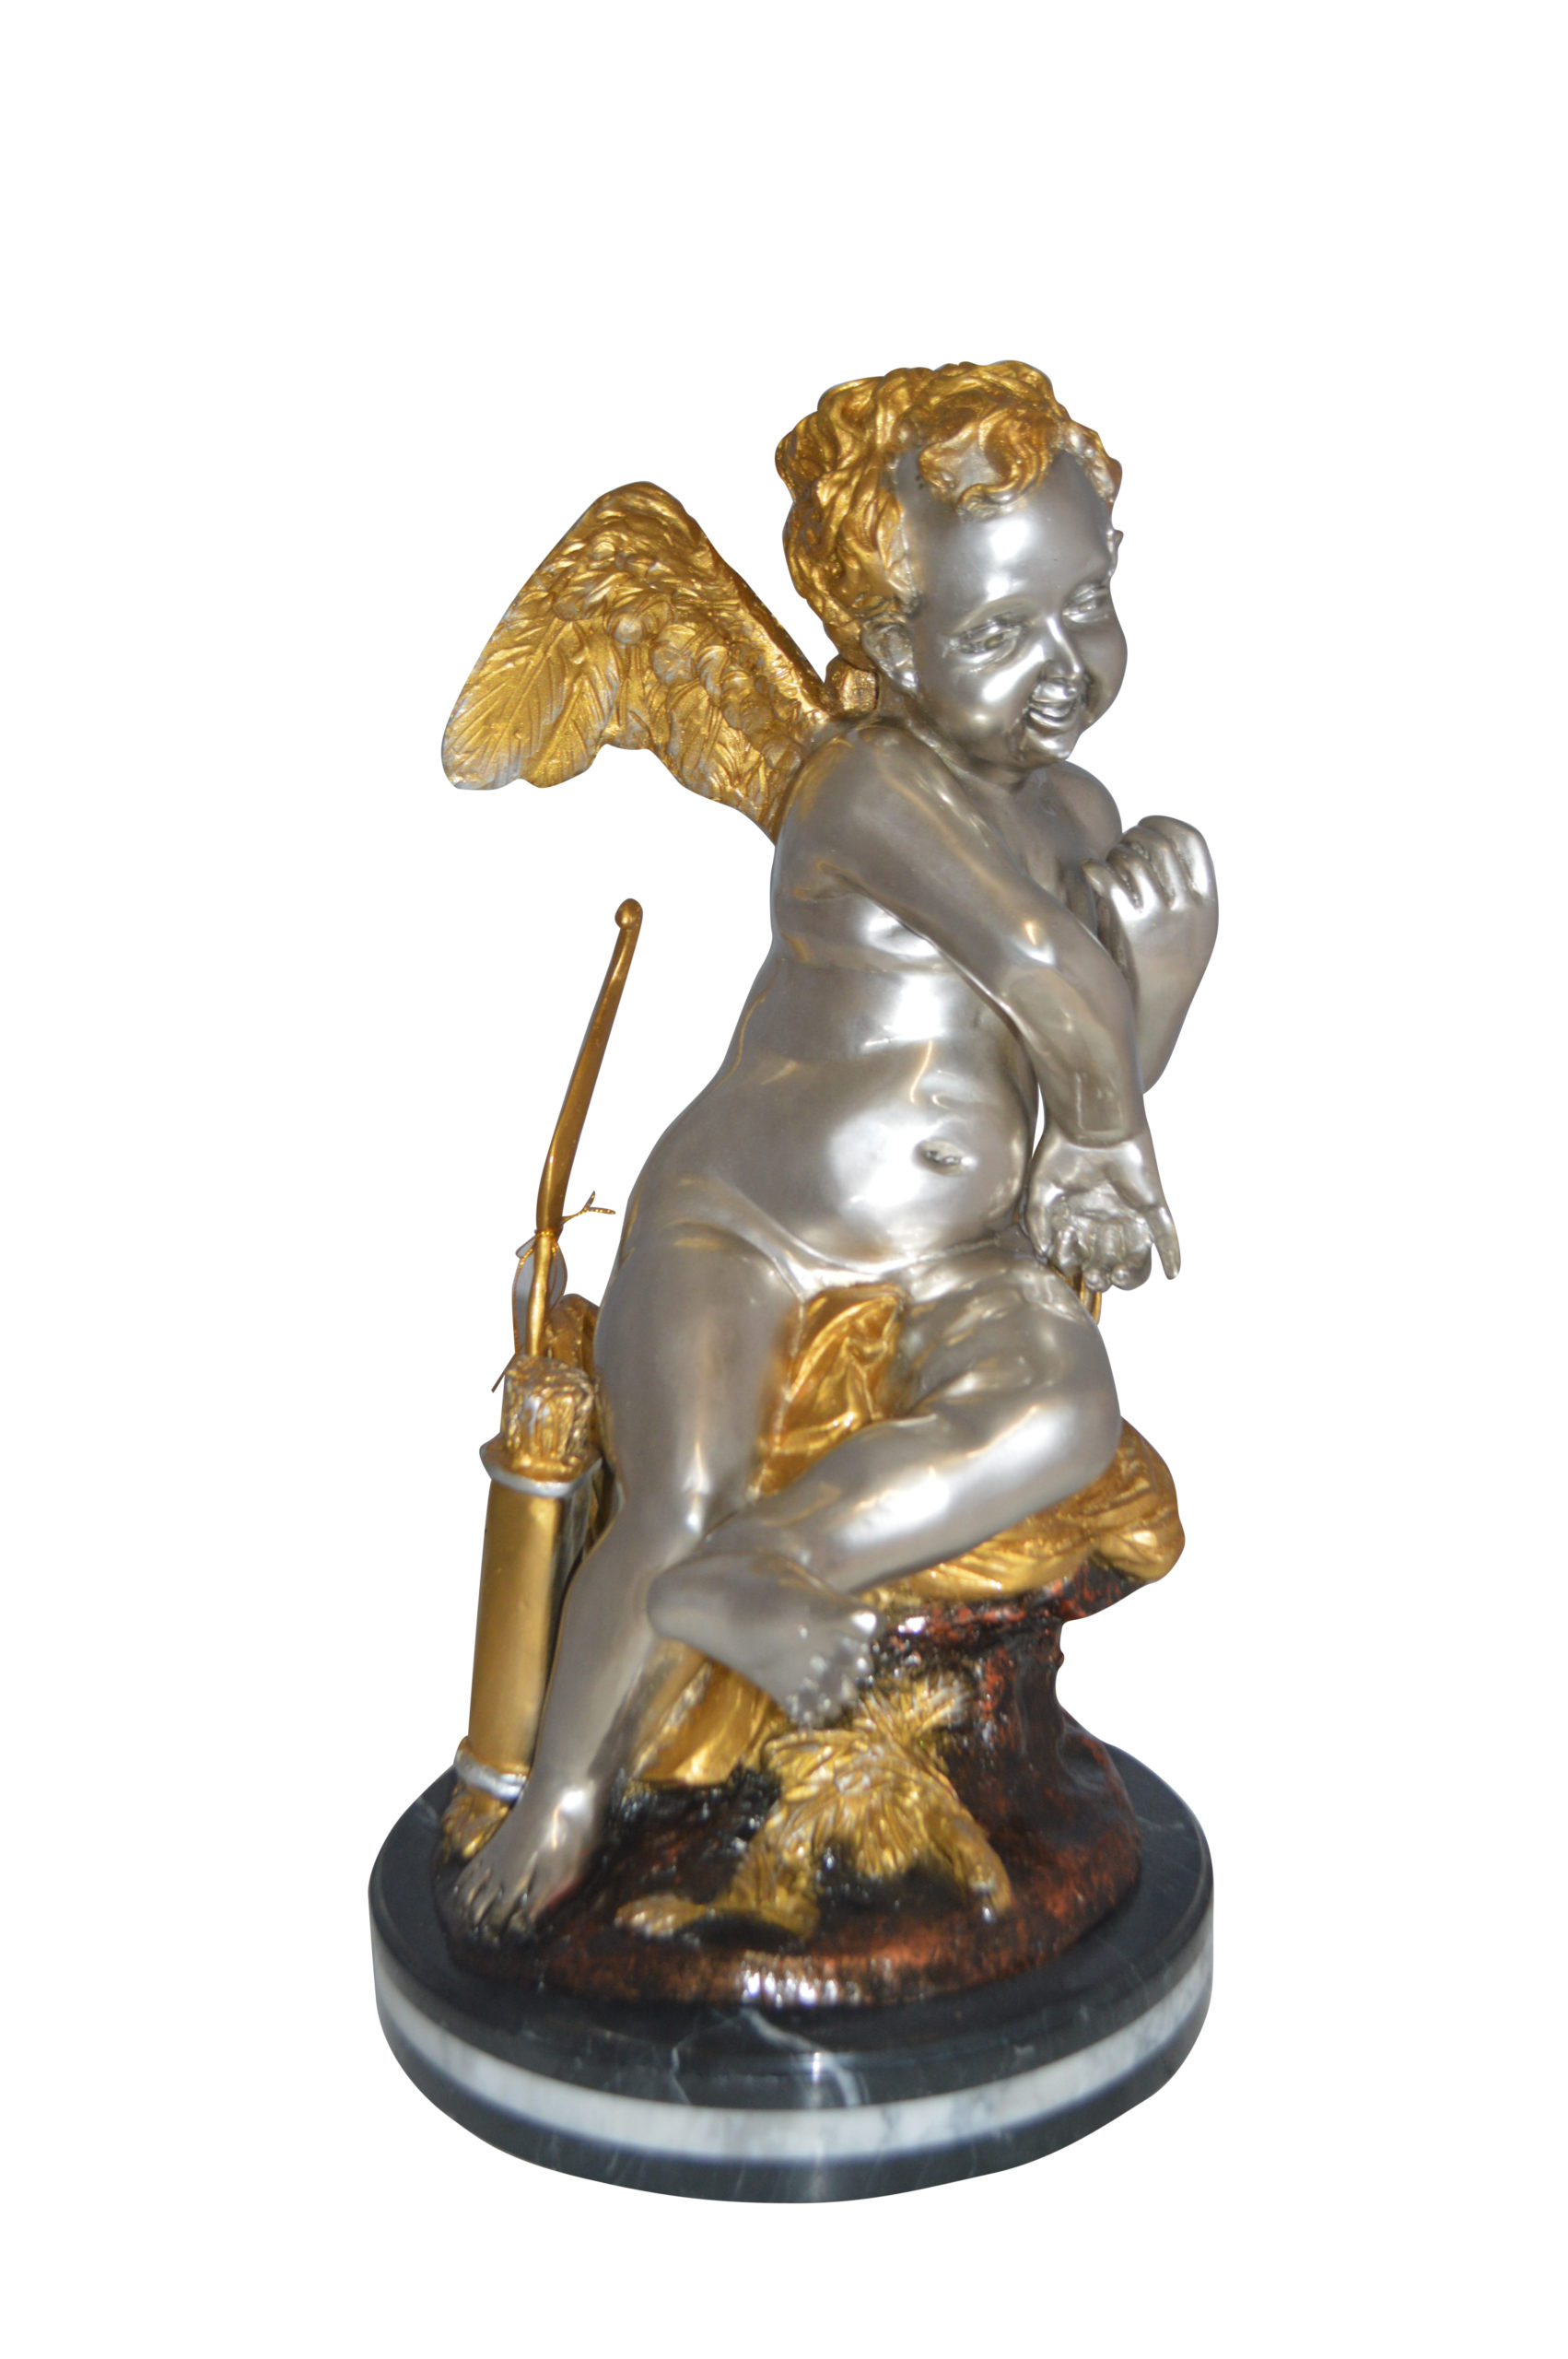 Nifao Cupid Girl On A Rock Bronze Statue - Size: 20"L x 15"W x 25"H. - image 1 of 14